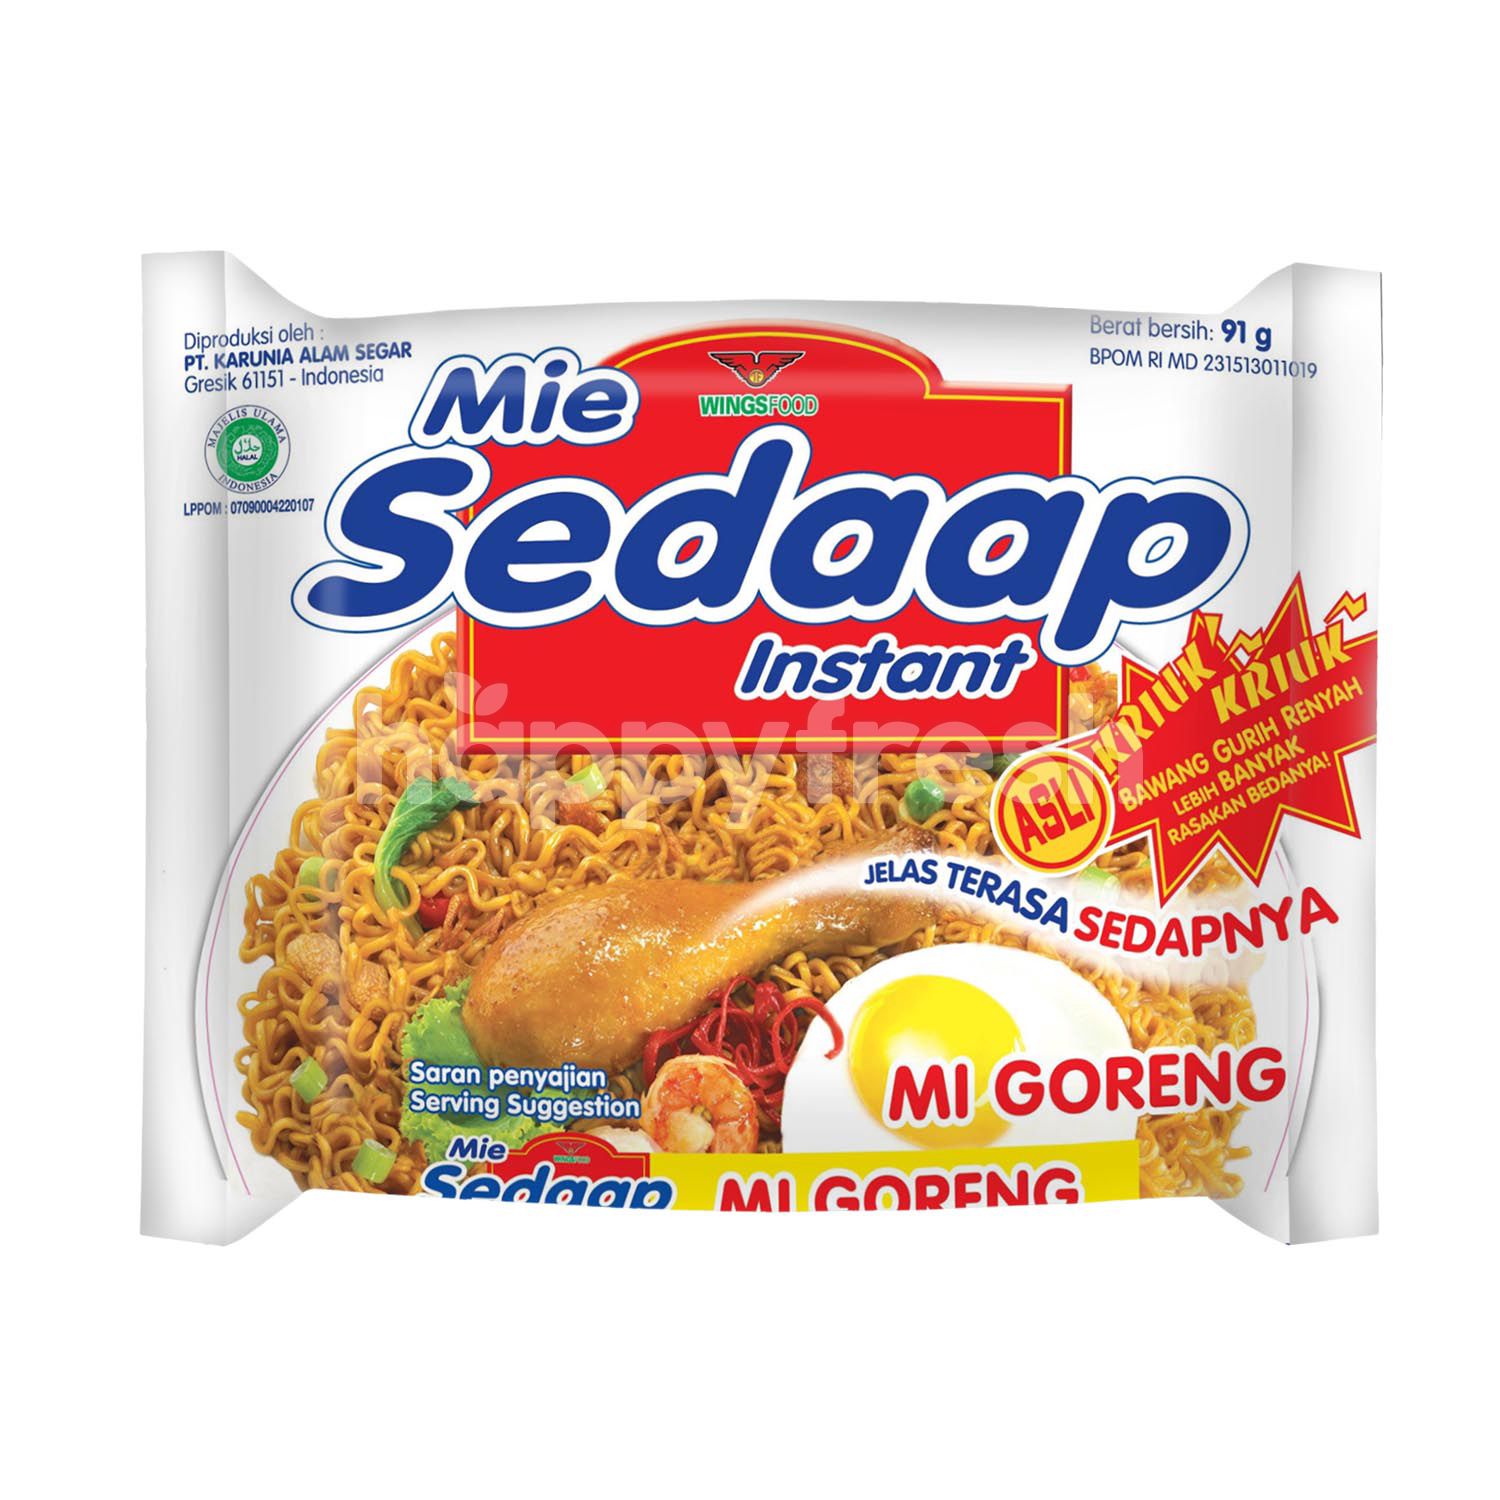 Where is mie sedaap from